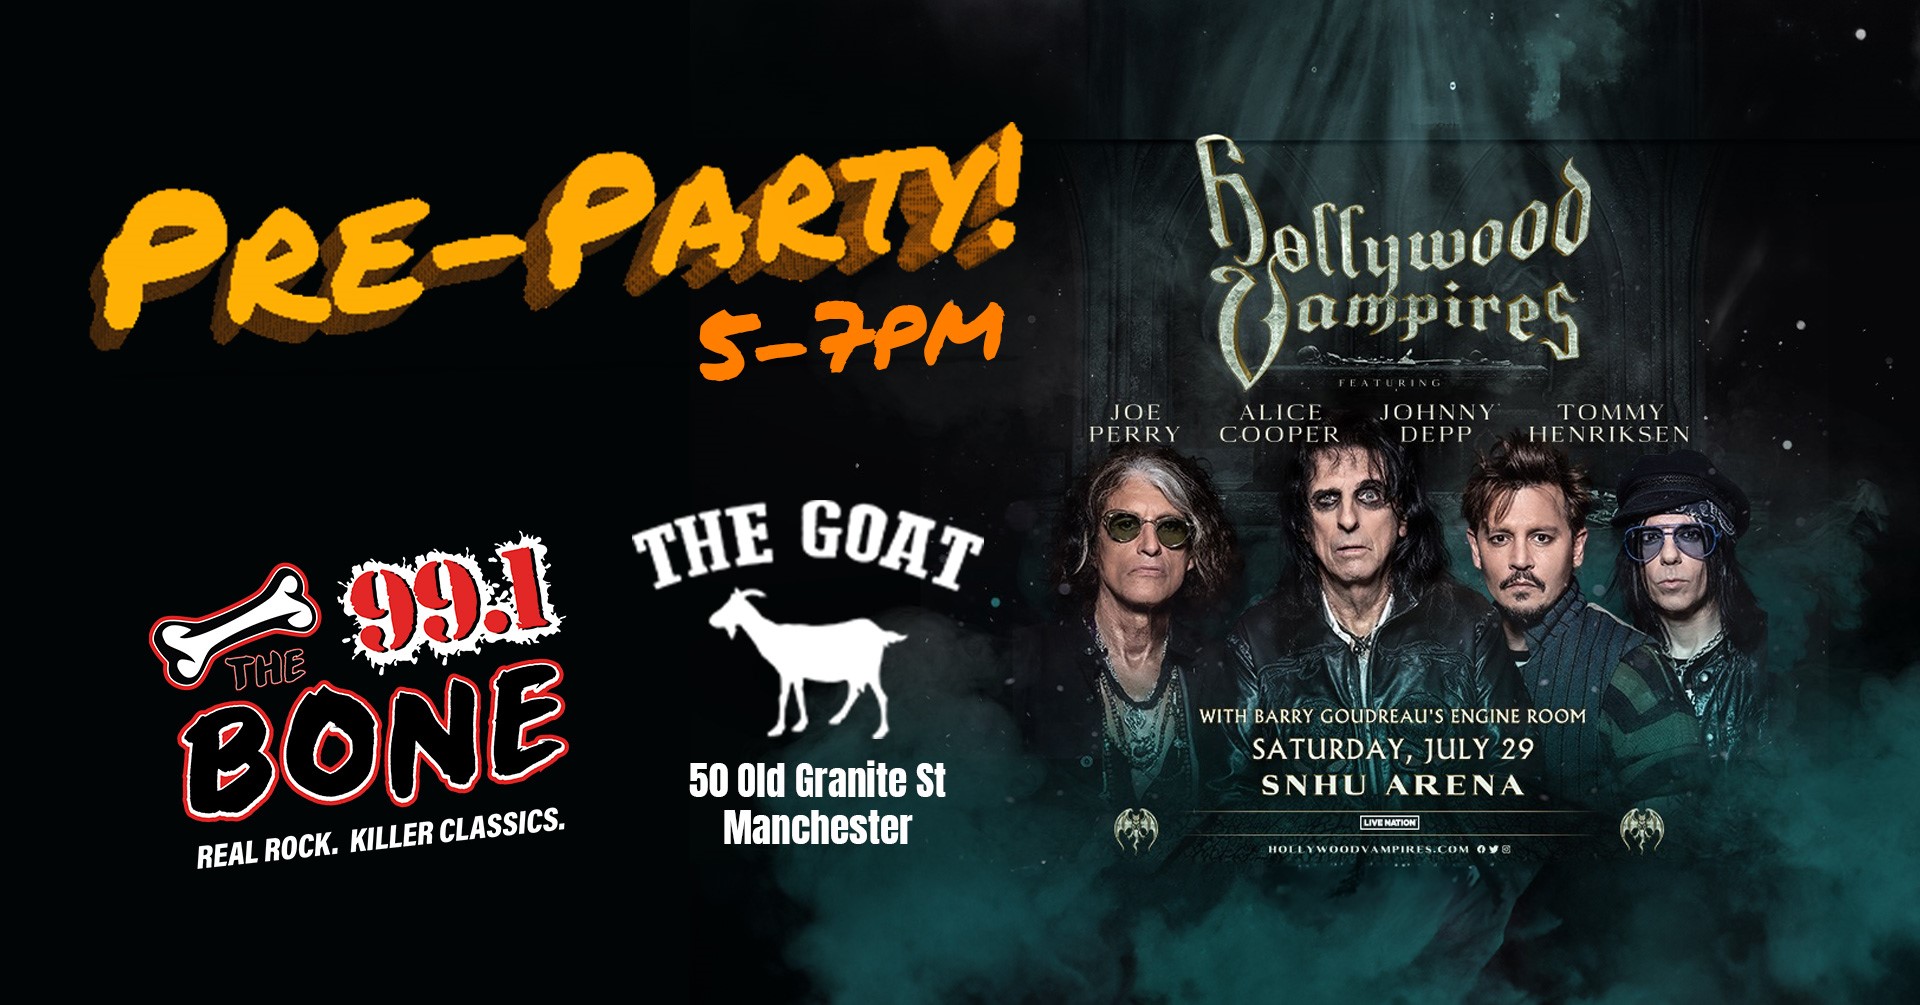 Hollywood Vampires Concert Pre-Party at The Goat: You Could Win Luxury Suite Upgrades!